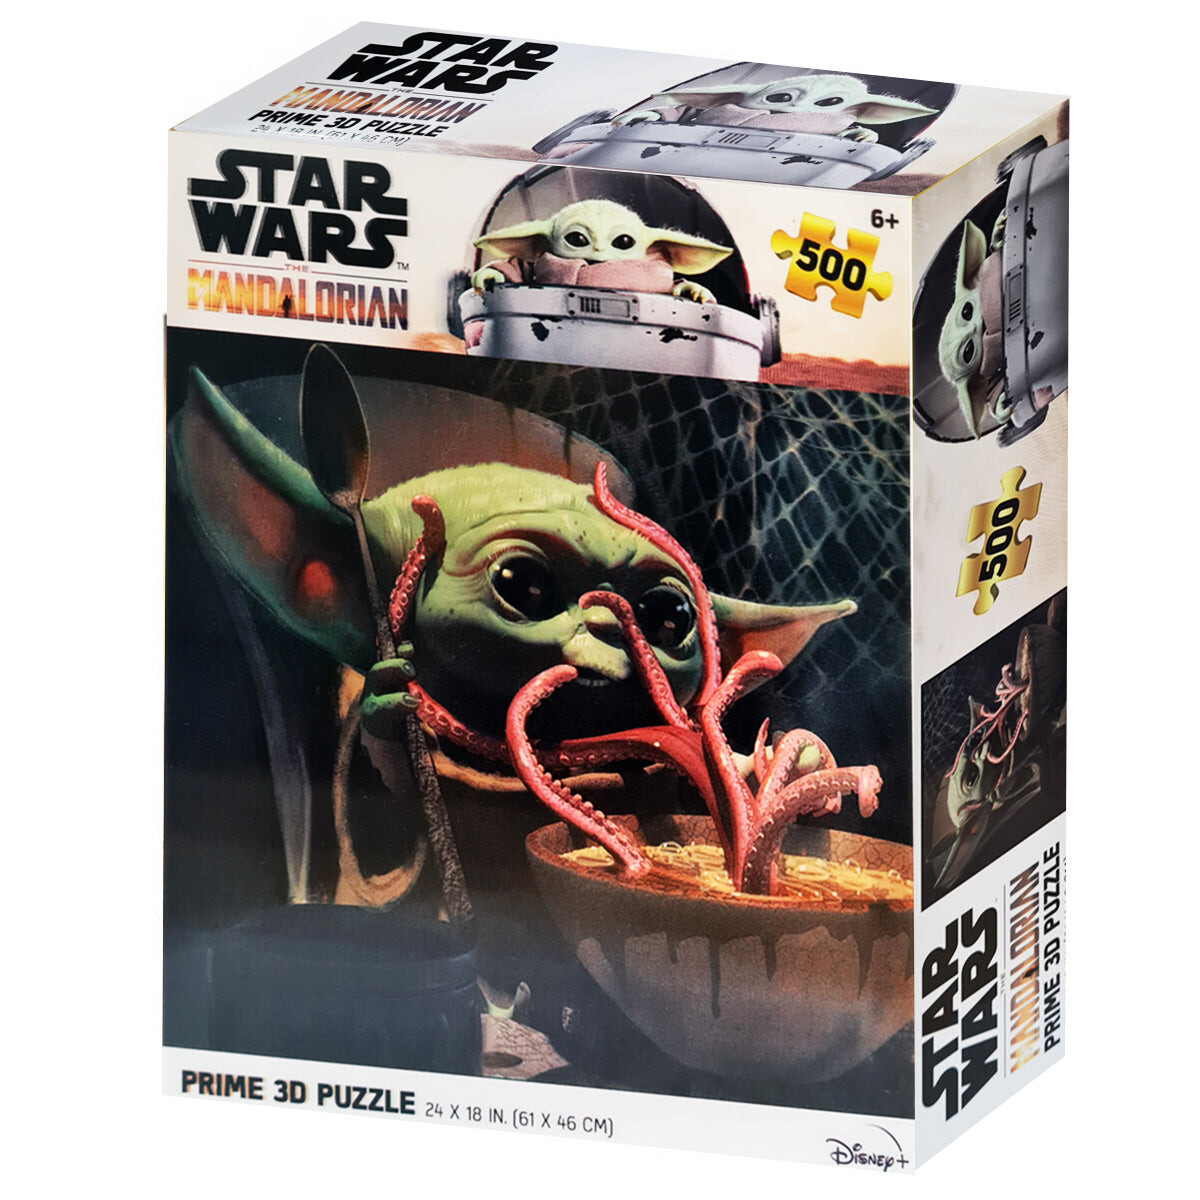 Puzzle Prime 3D Lenticular Star Wars Baby Yoda 500pzs 